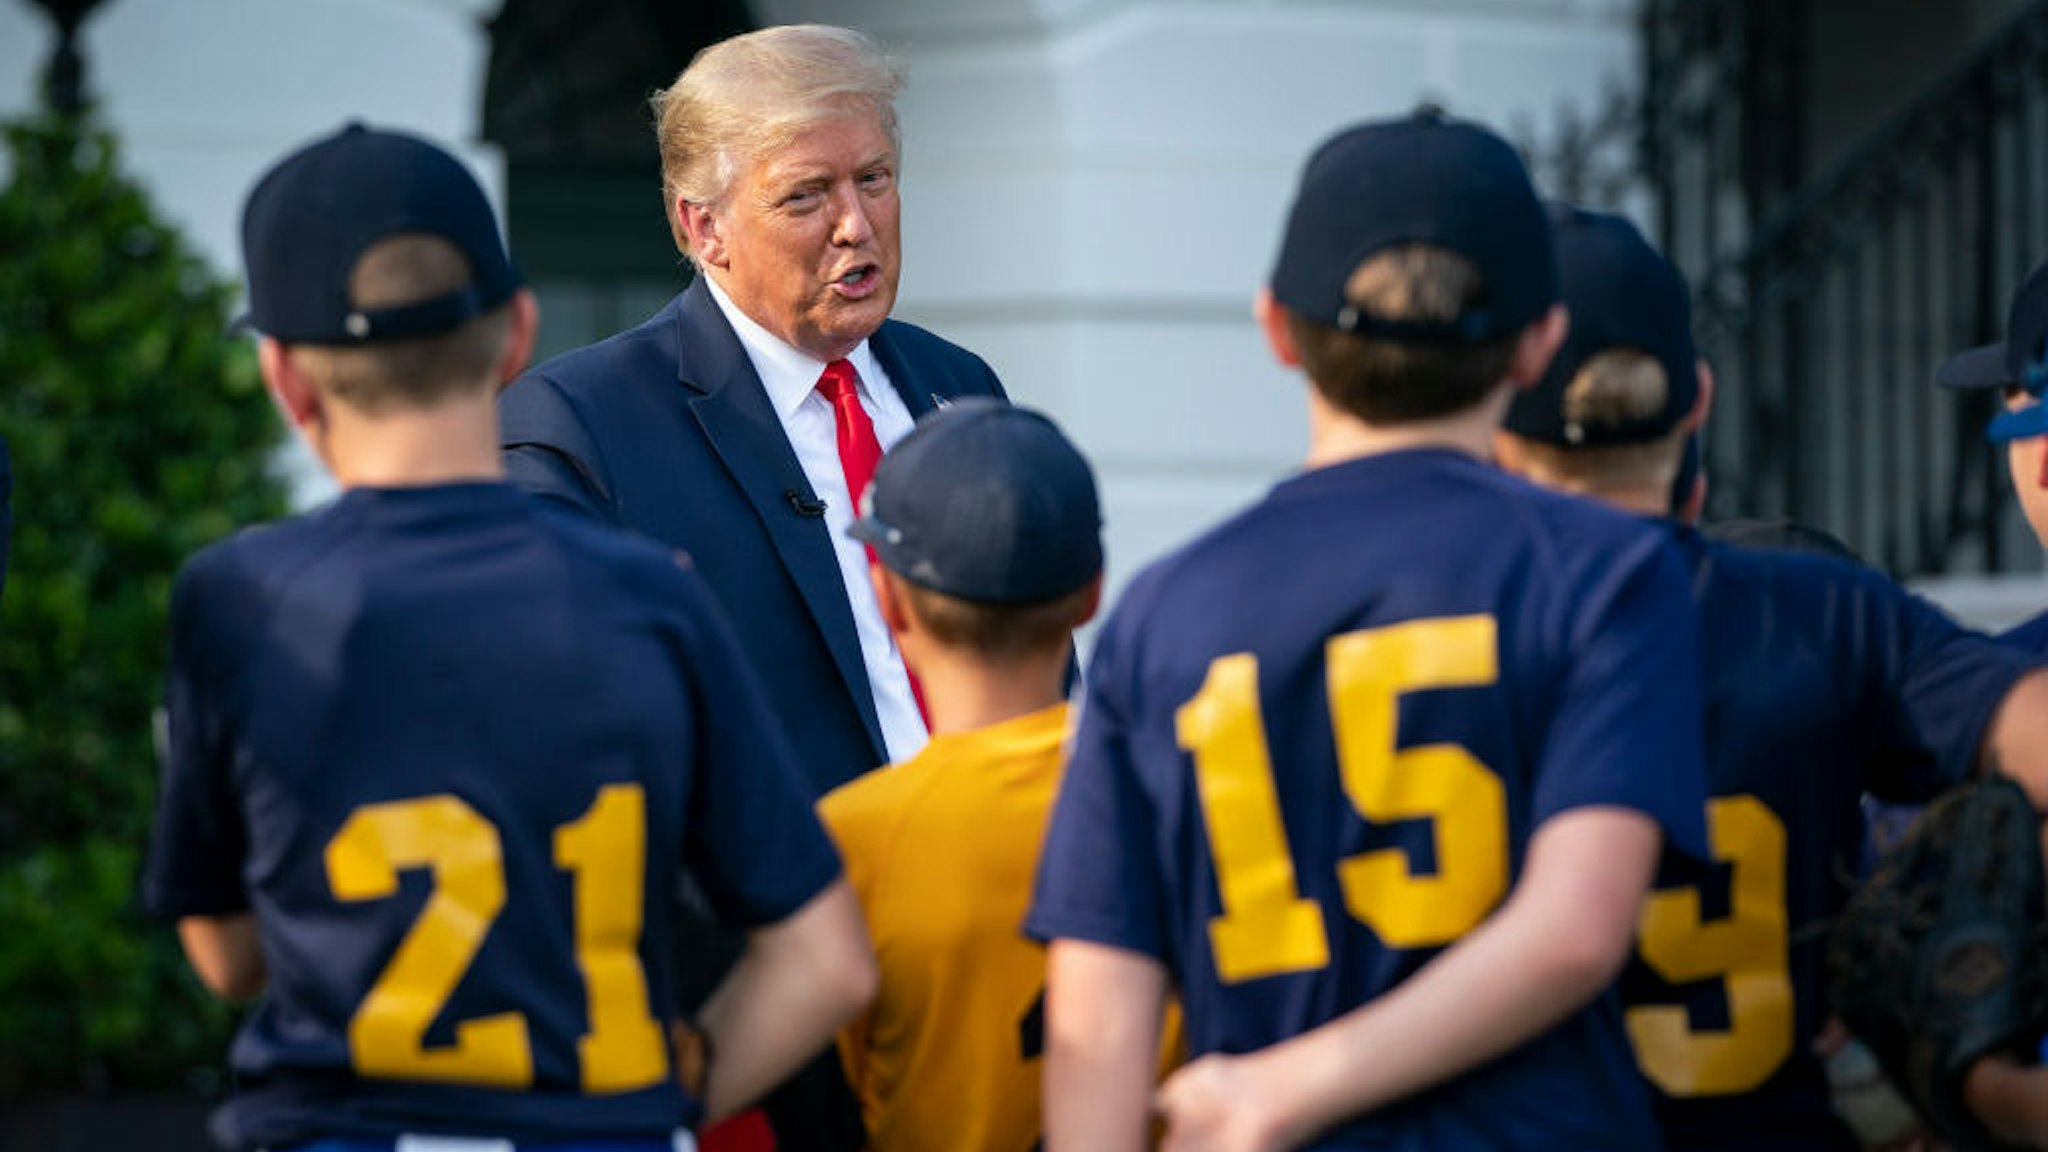 WASHINGTON, DC - JULY 23: U.S. President Donald Trump talks with youth baseball players on the South Lawn of the White House on July 23, 2020 in Washington, DC. President Trump and former New York Yankees Hall of Fame pitcher Mariano Rivera met with youth baseball players to celebrate Opening Day of Major League Baseball. (Photo by Drew Angerer/Getty Images)